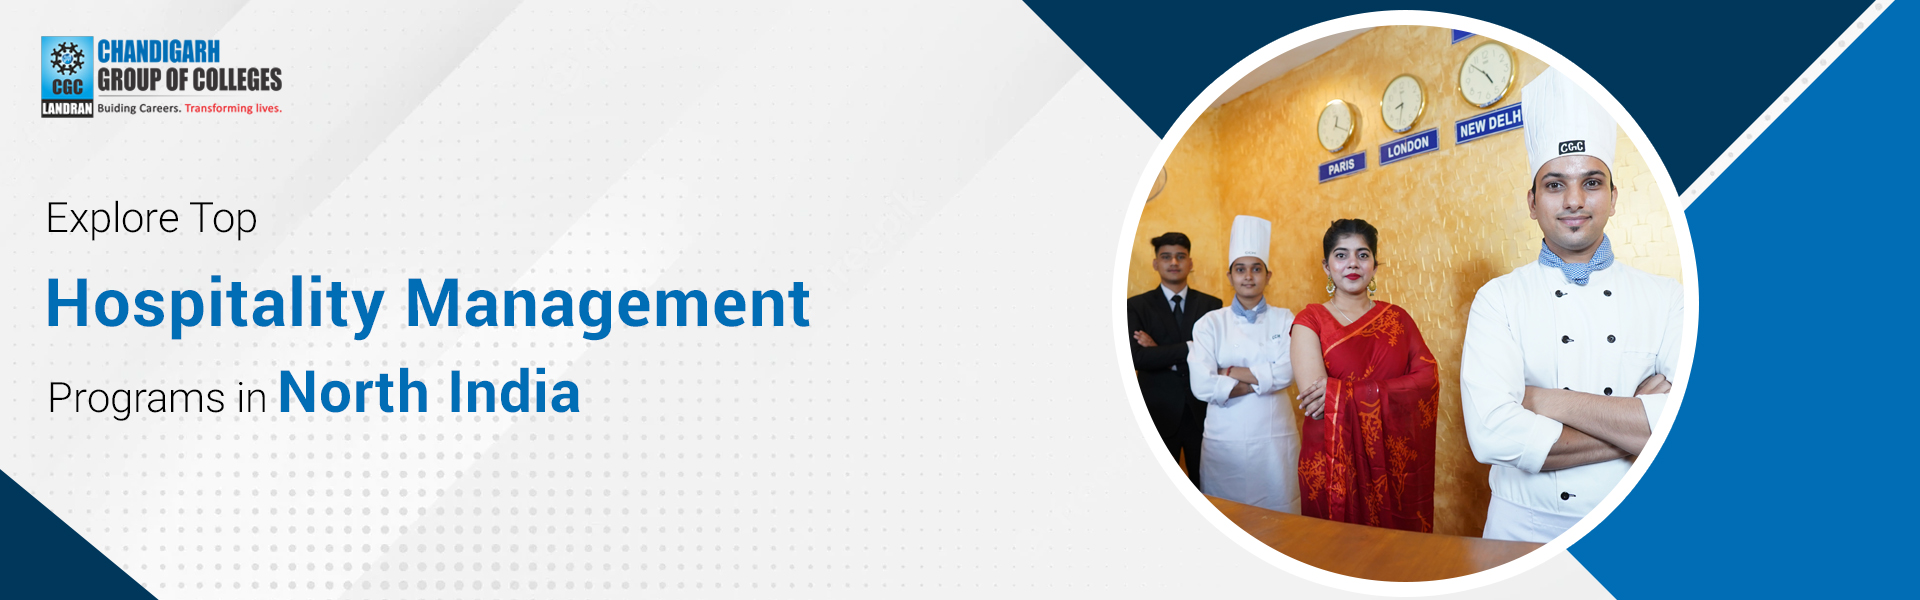 Explore Top Hospitality Management Courses in North India 